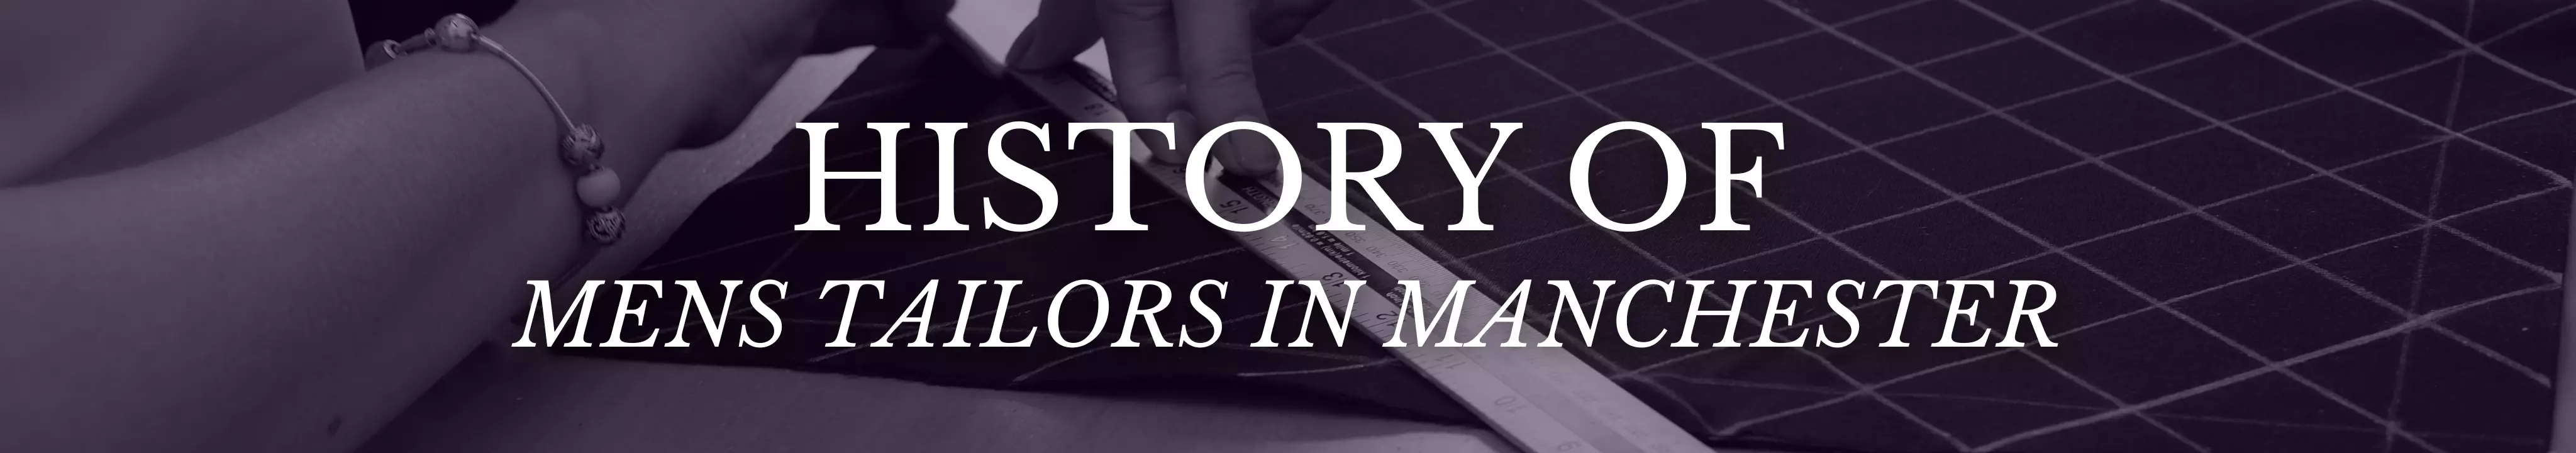 History of Mens Tailors in Manchester